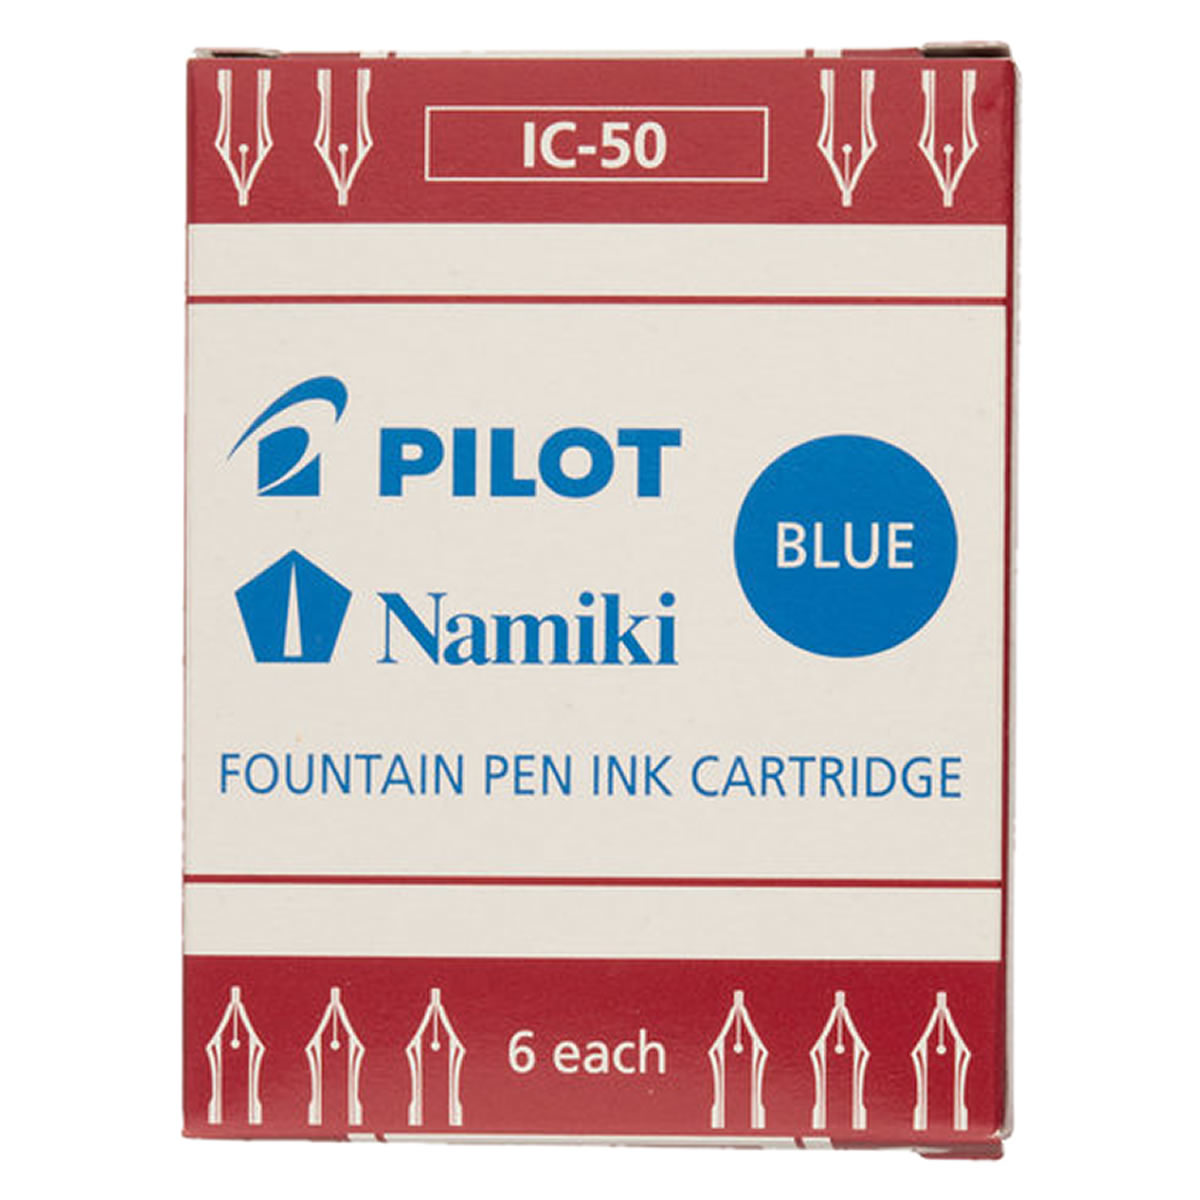 Pilot IC-50 Blue Ink Cartridges - Pack of 6